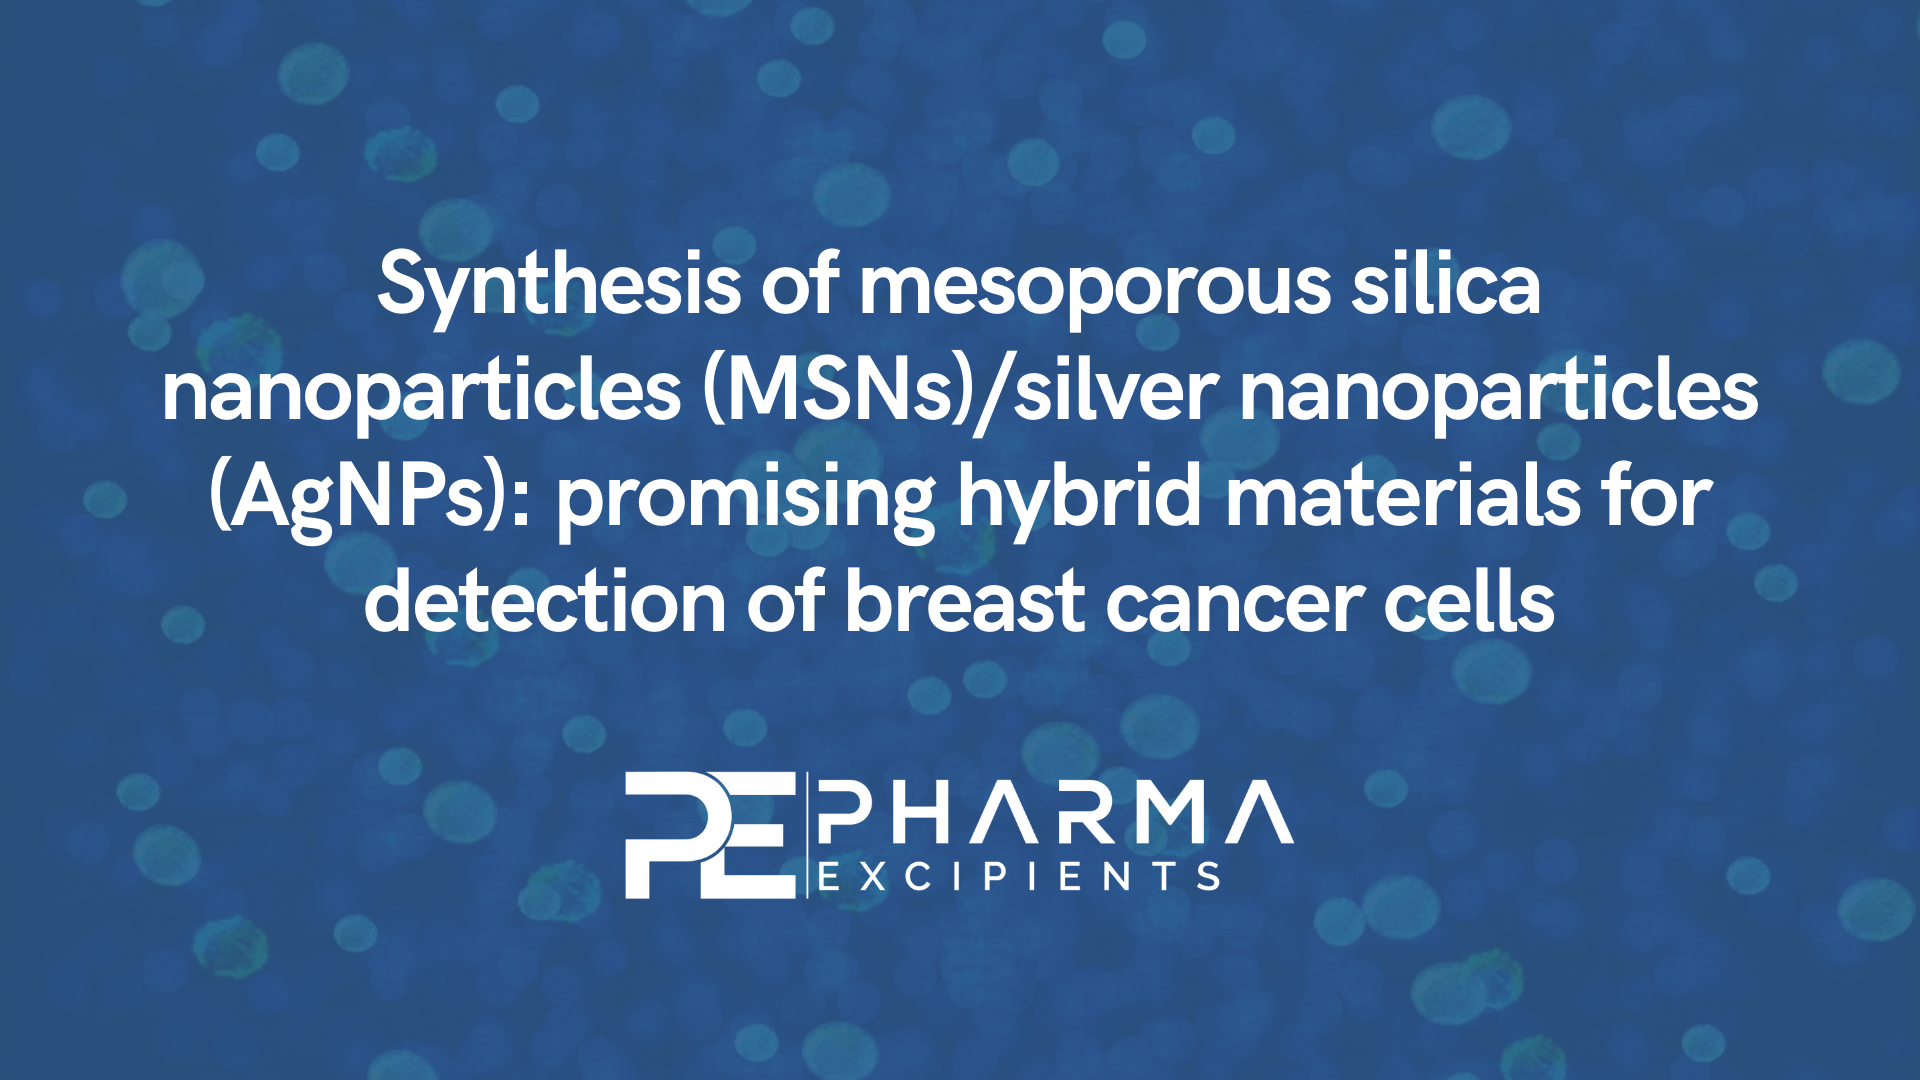 Synthesis Of Mesoporous Silica Nanoparticles Msns Silver Nanoparticles Agnps Promising